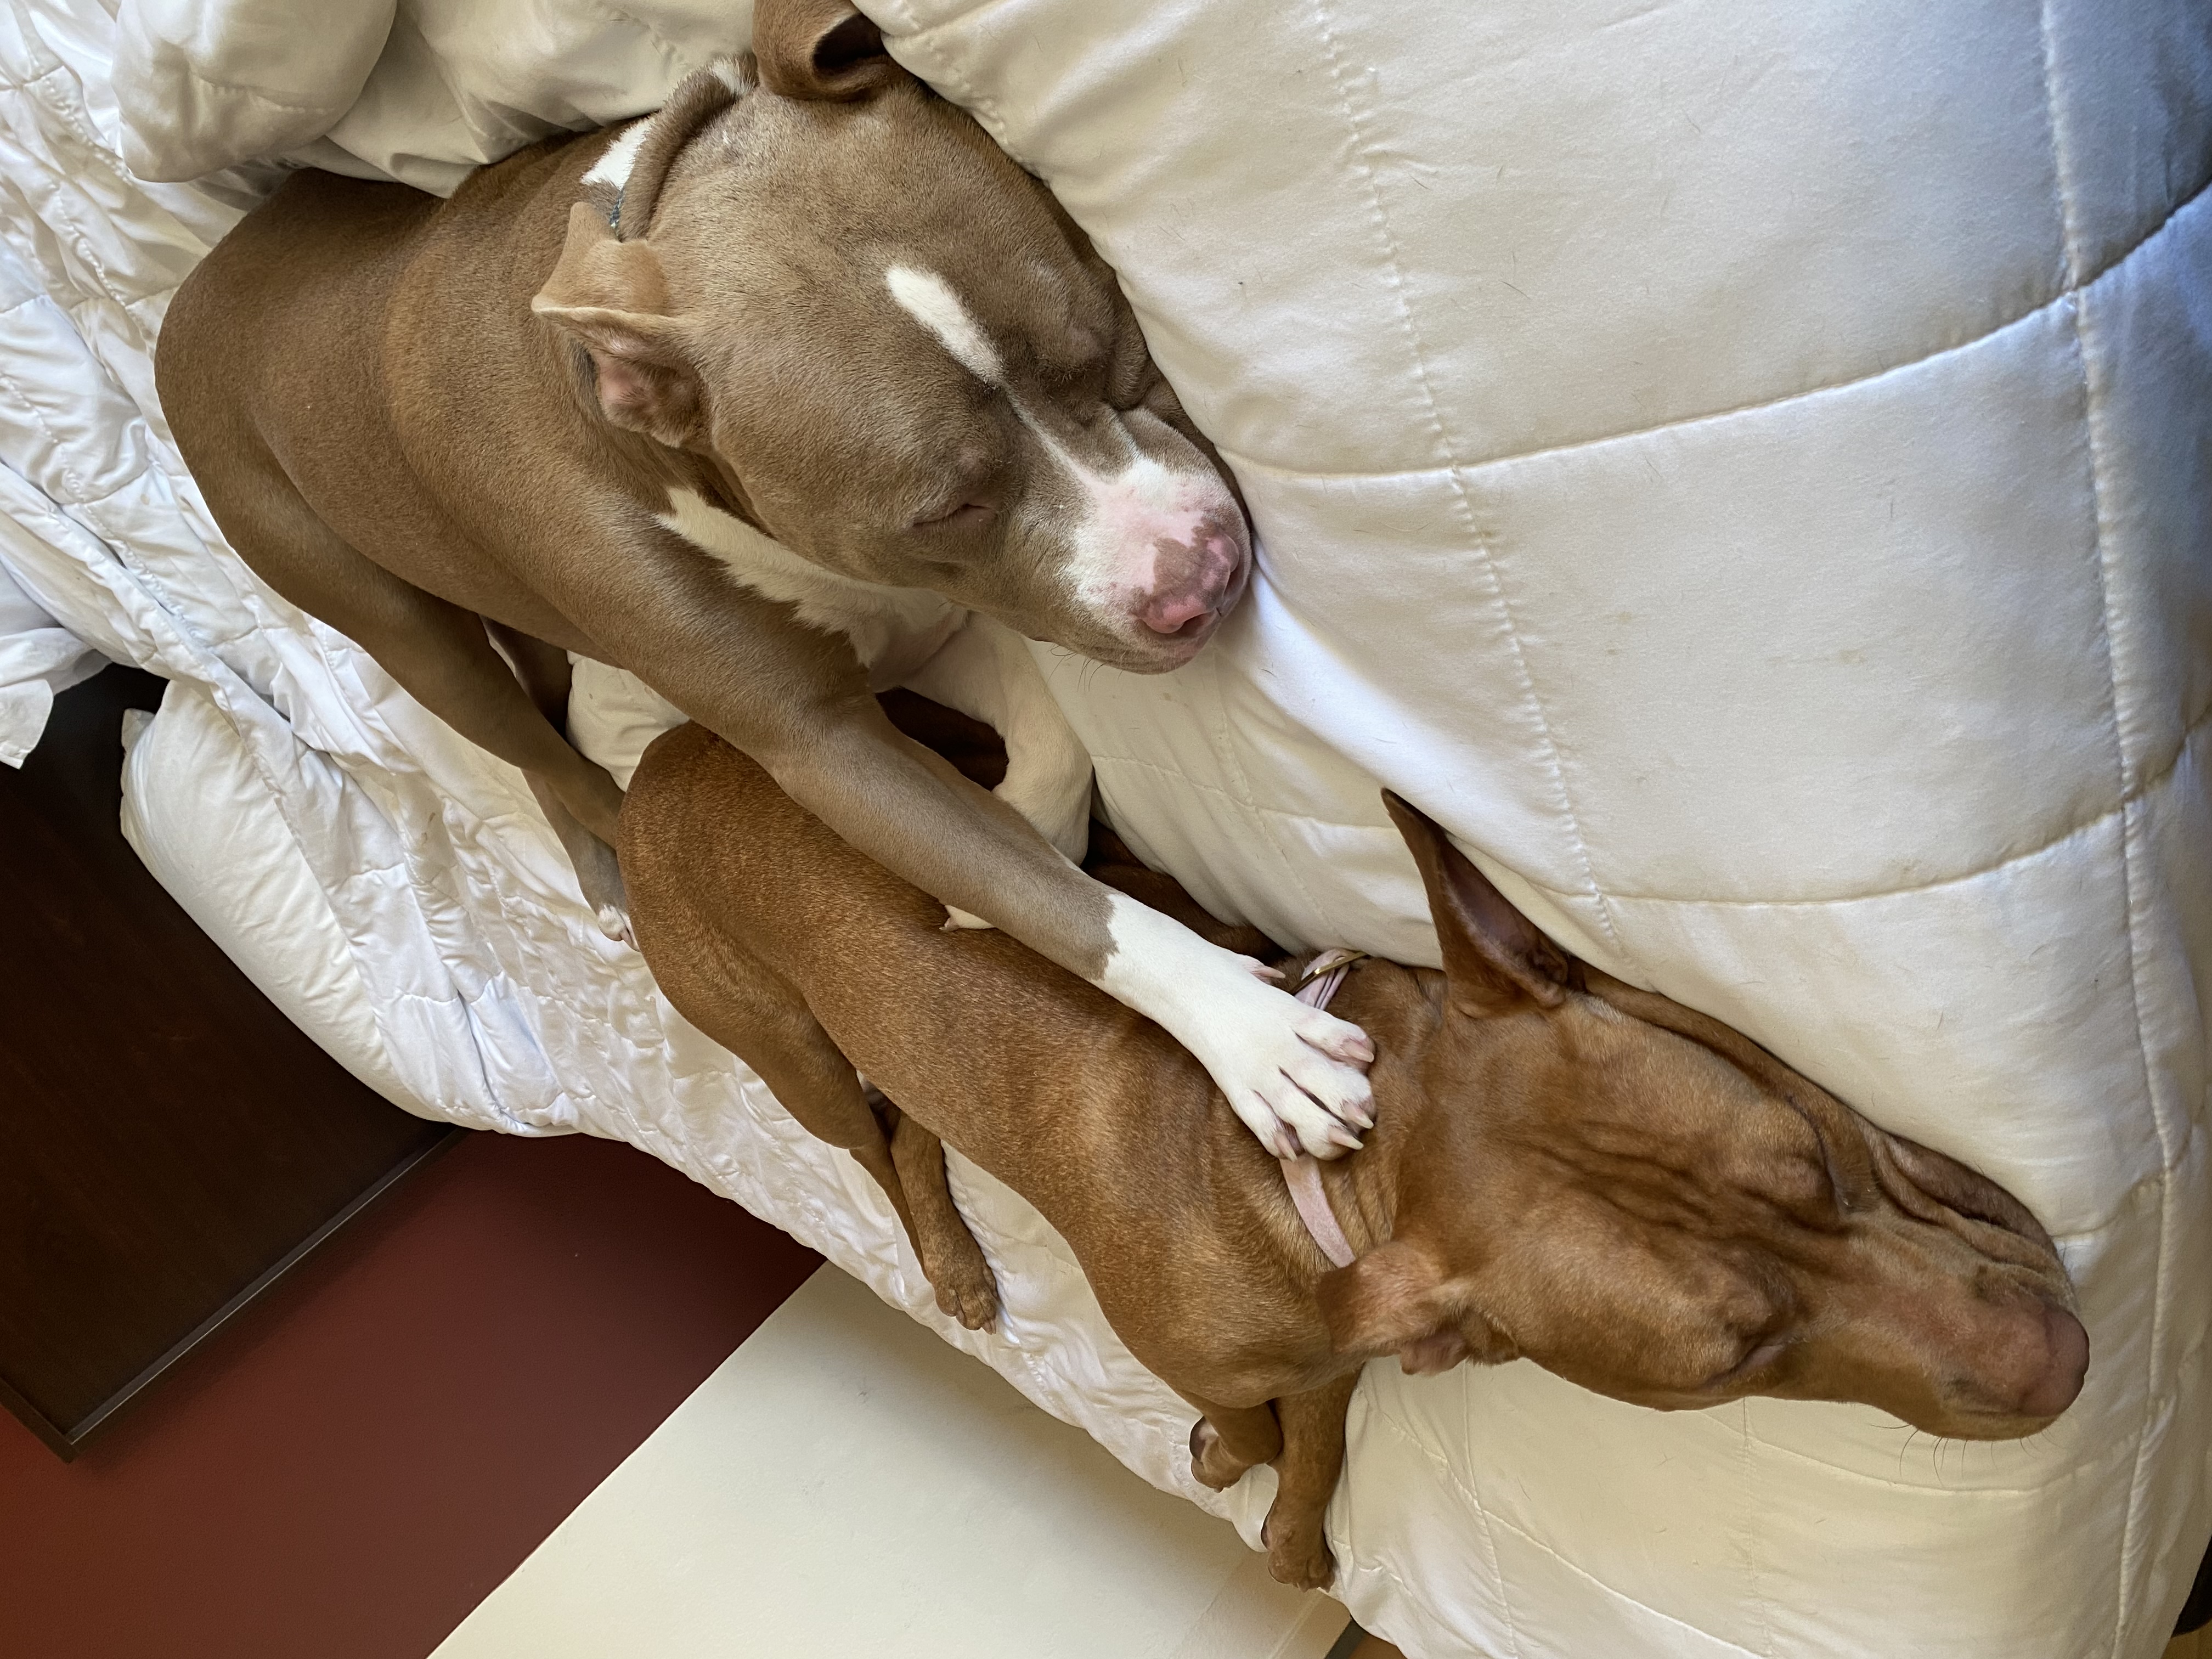 a picture of Megan the Stallion & Milo a dog that needs a foster home.